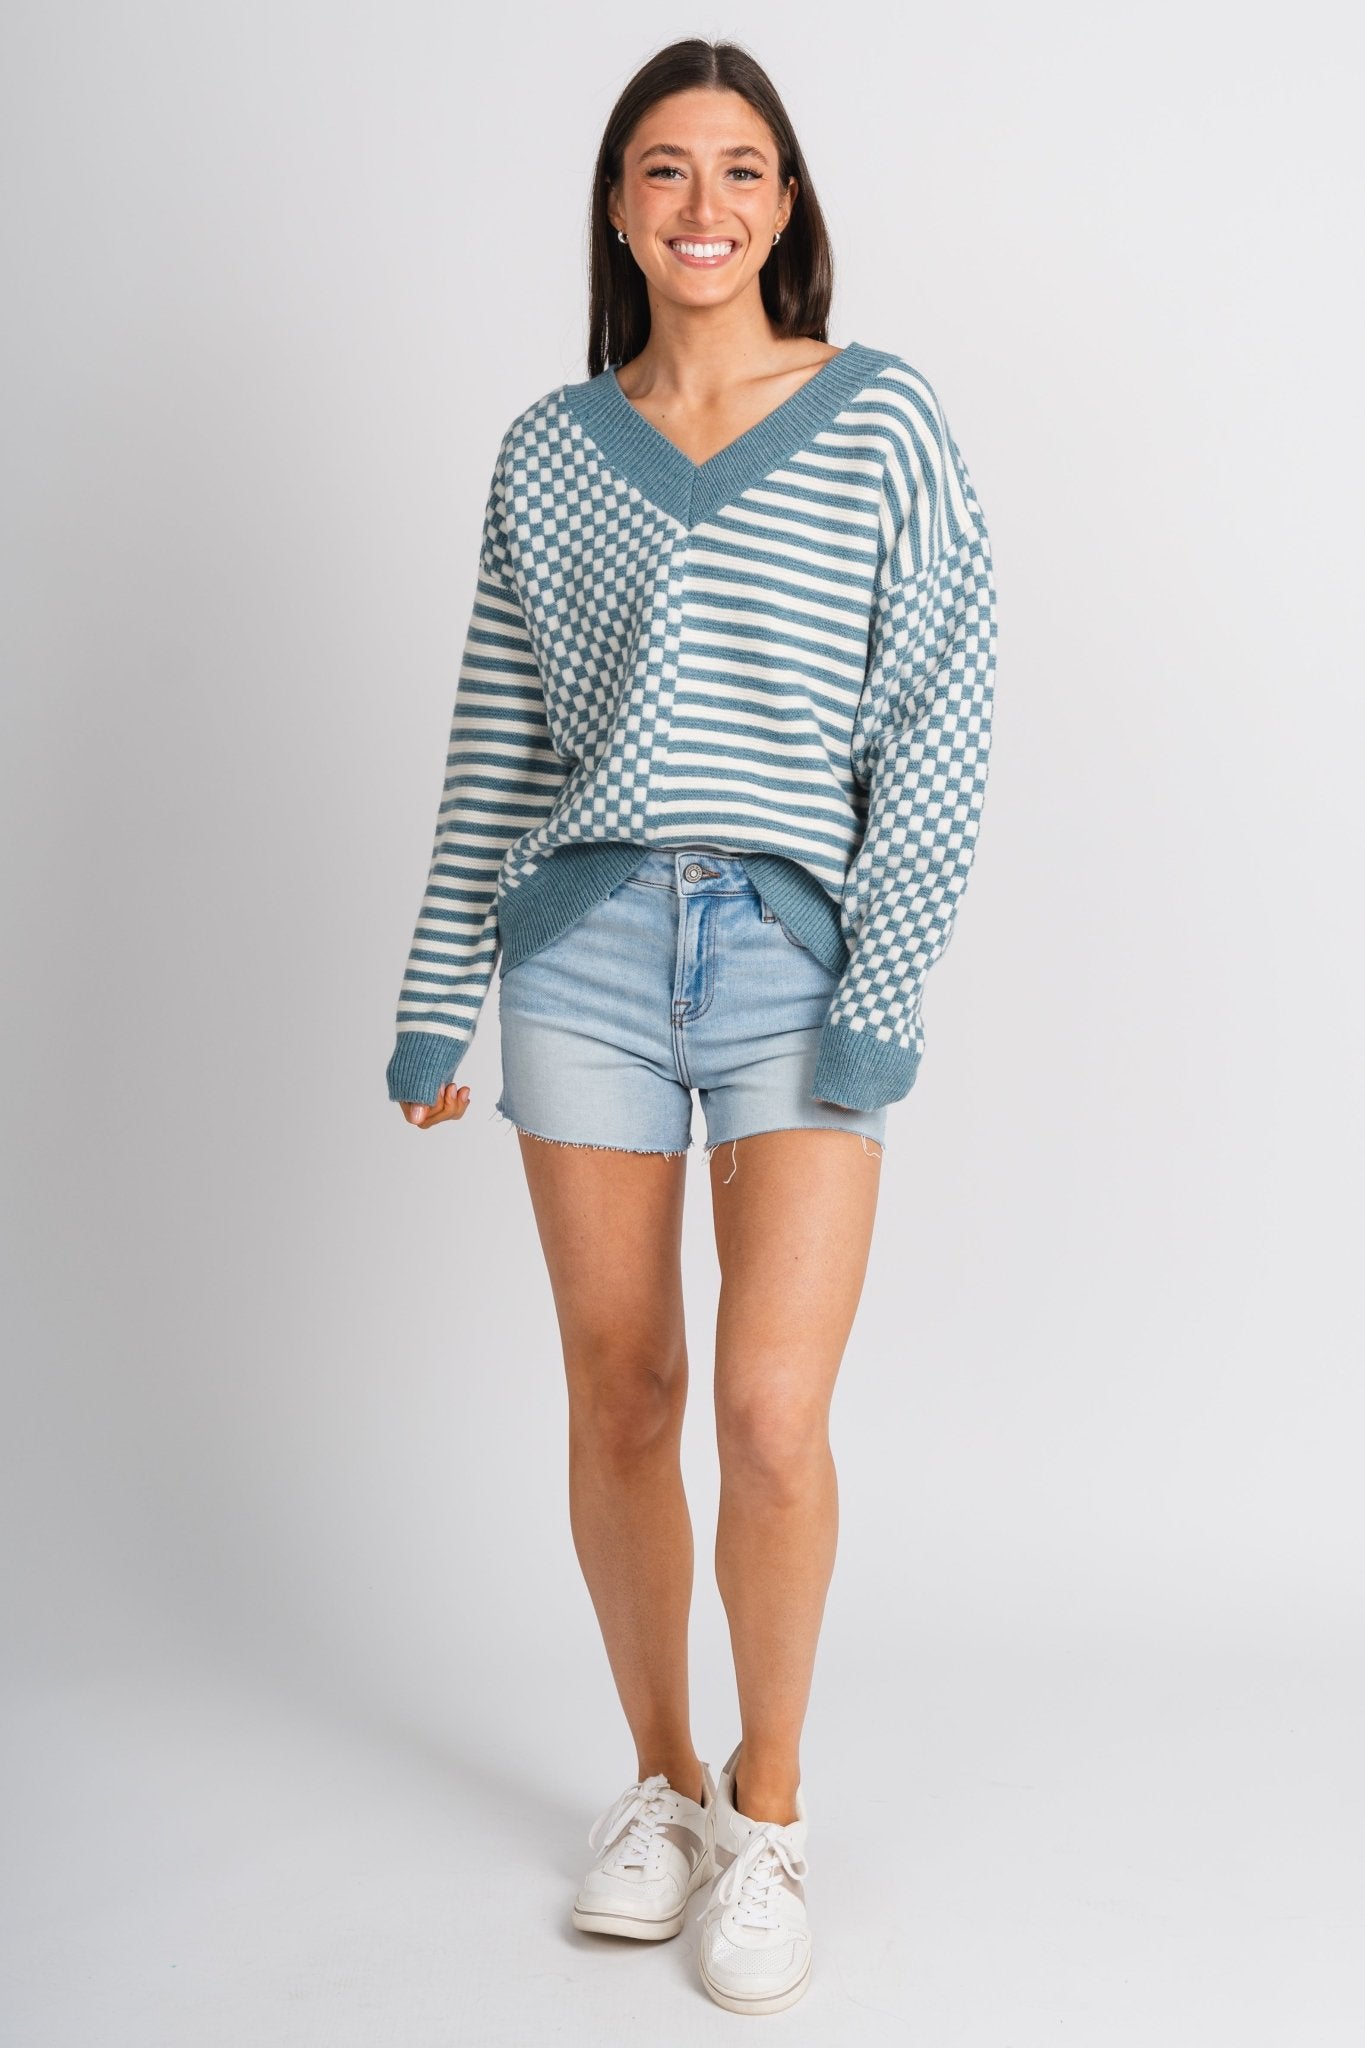 Checkered sweater ivory/blue - Trendy Sweaters | Cute Pullover Sweaters at Lush Fashion Lounge Boutique in Oklahoma City